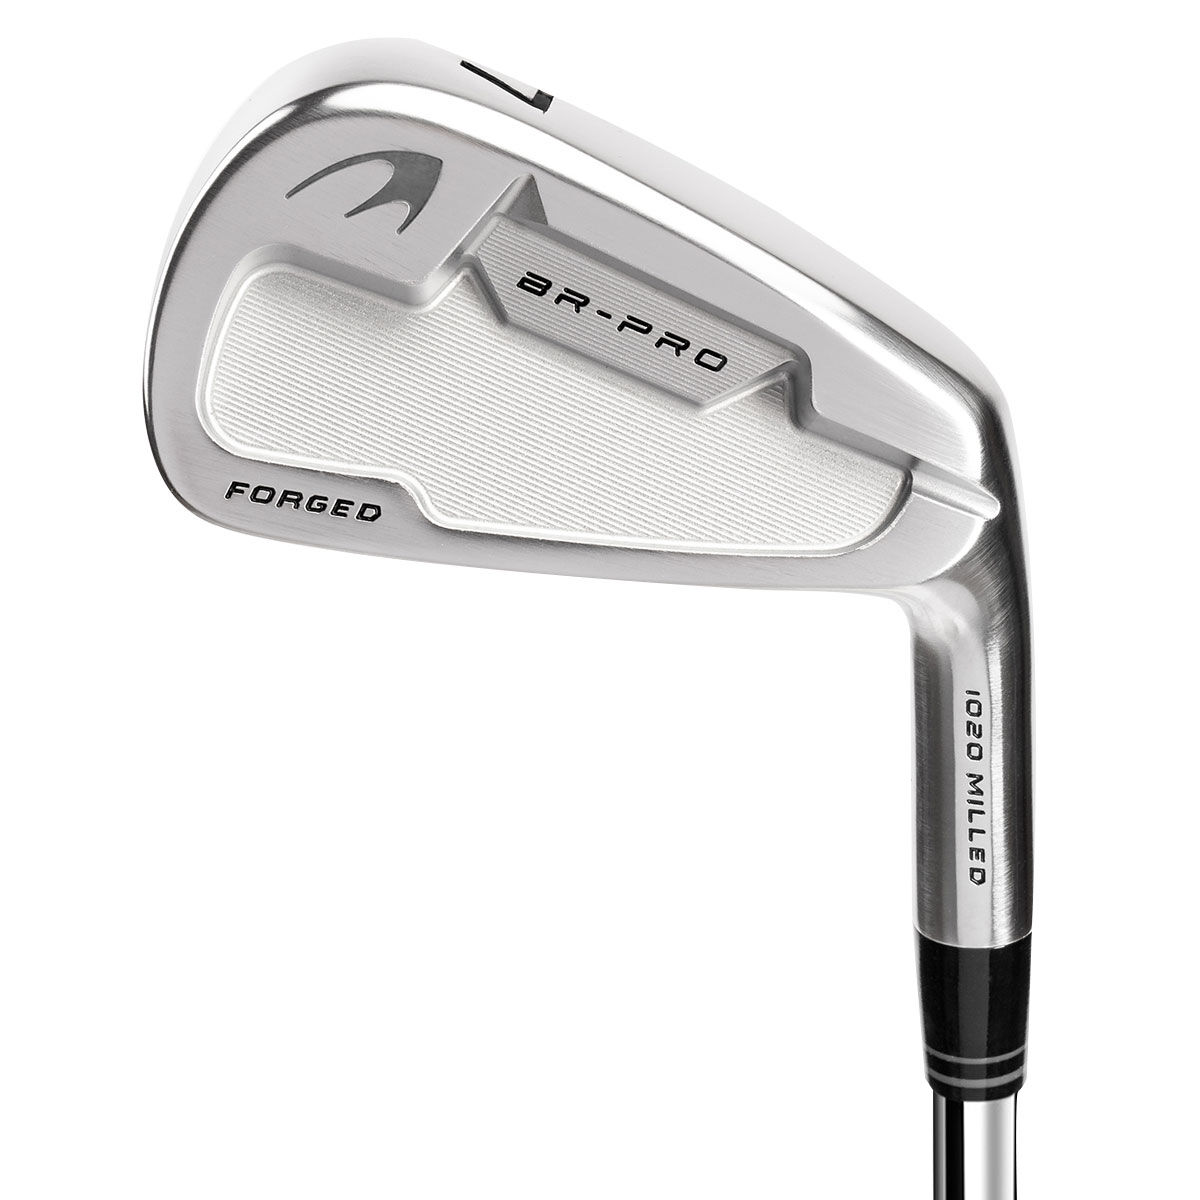 Benross Mens, Silver Br-Pro Steel Golf Irons, 4-Pw (7 Golf Irons), Right Hand, Steel, Size: Regular | American Golf, 4pw